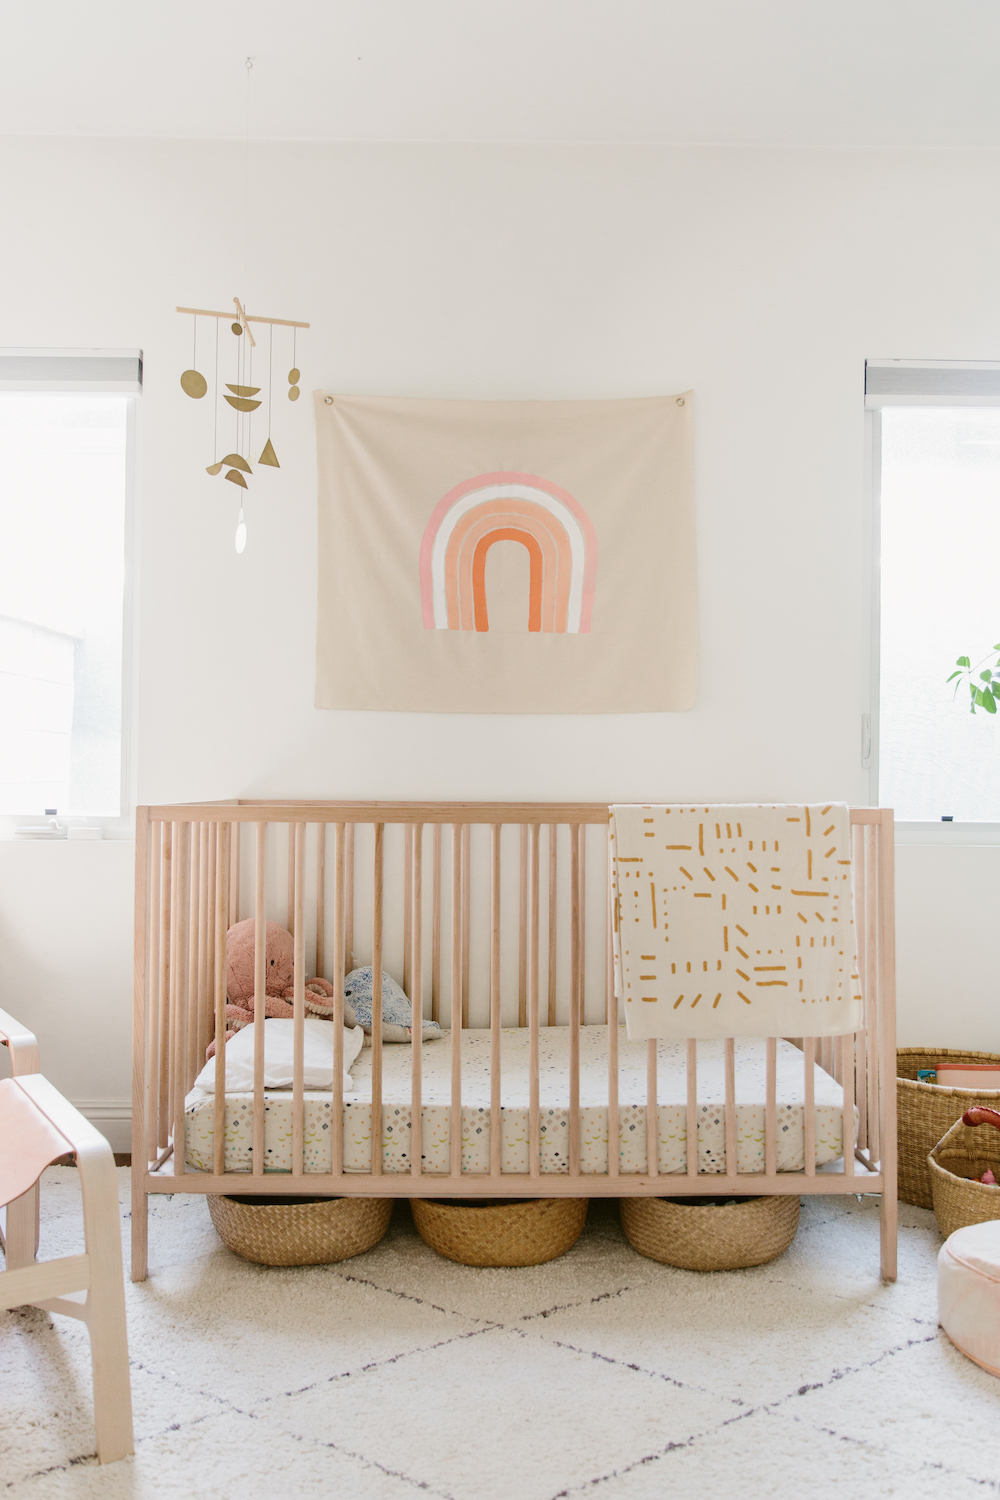 molly madfis home, almost makes perfect, california home, neutral home decor, nursery, baby, chic baby decor